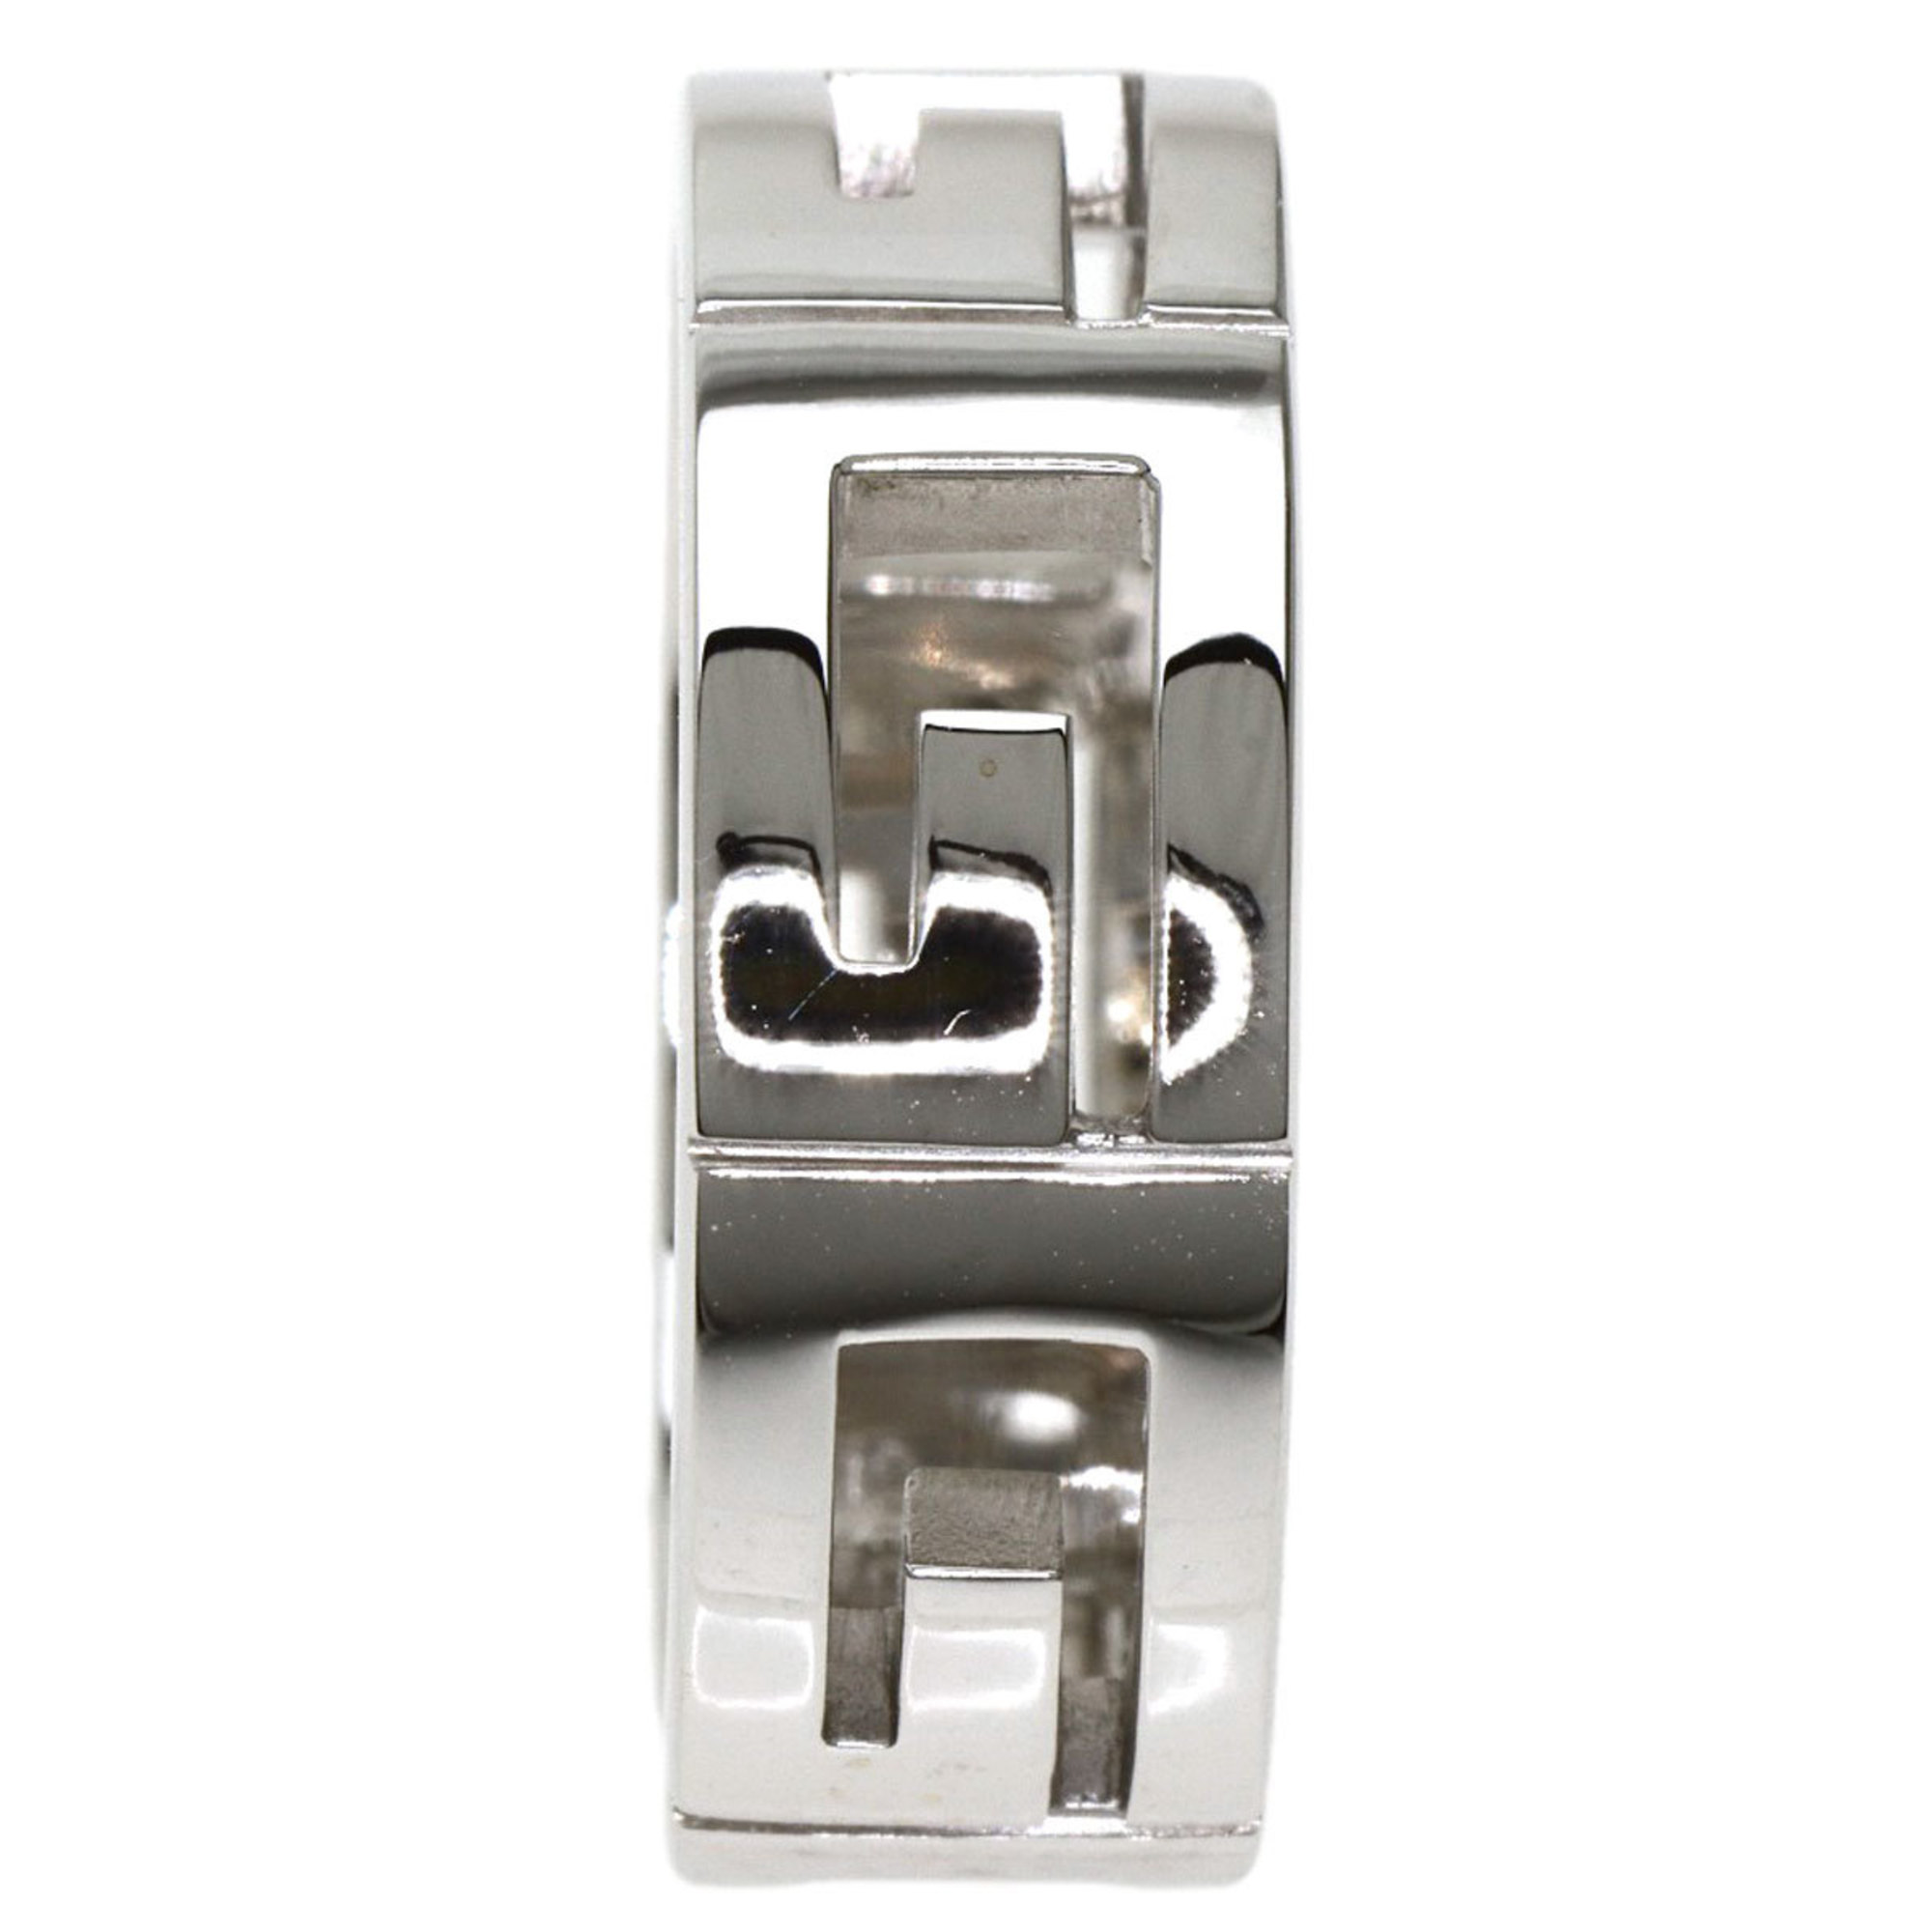 Gucci G Ring K18 White Gold Ladies GUCCI